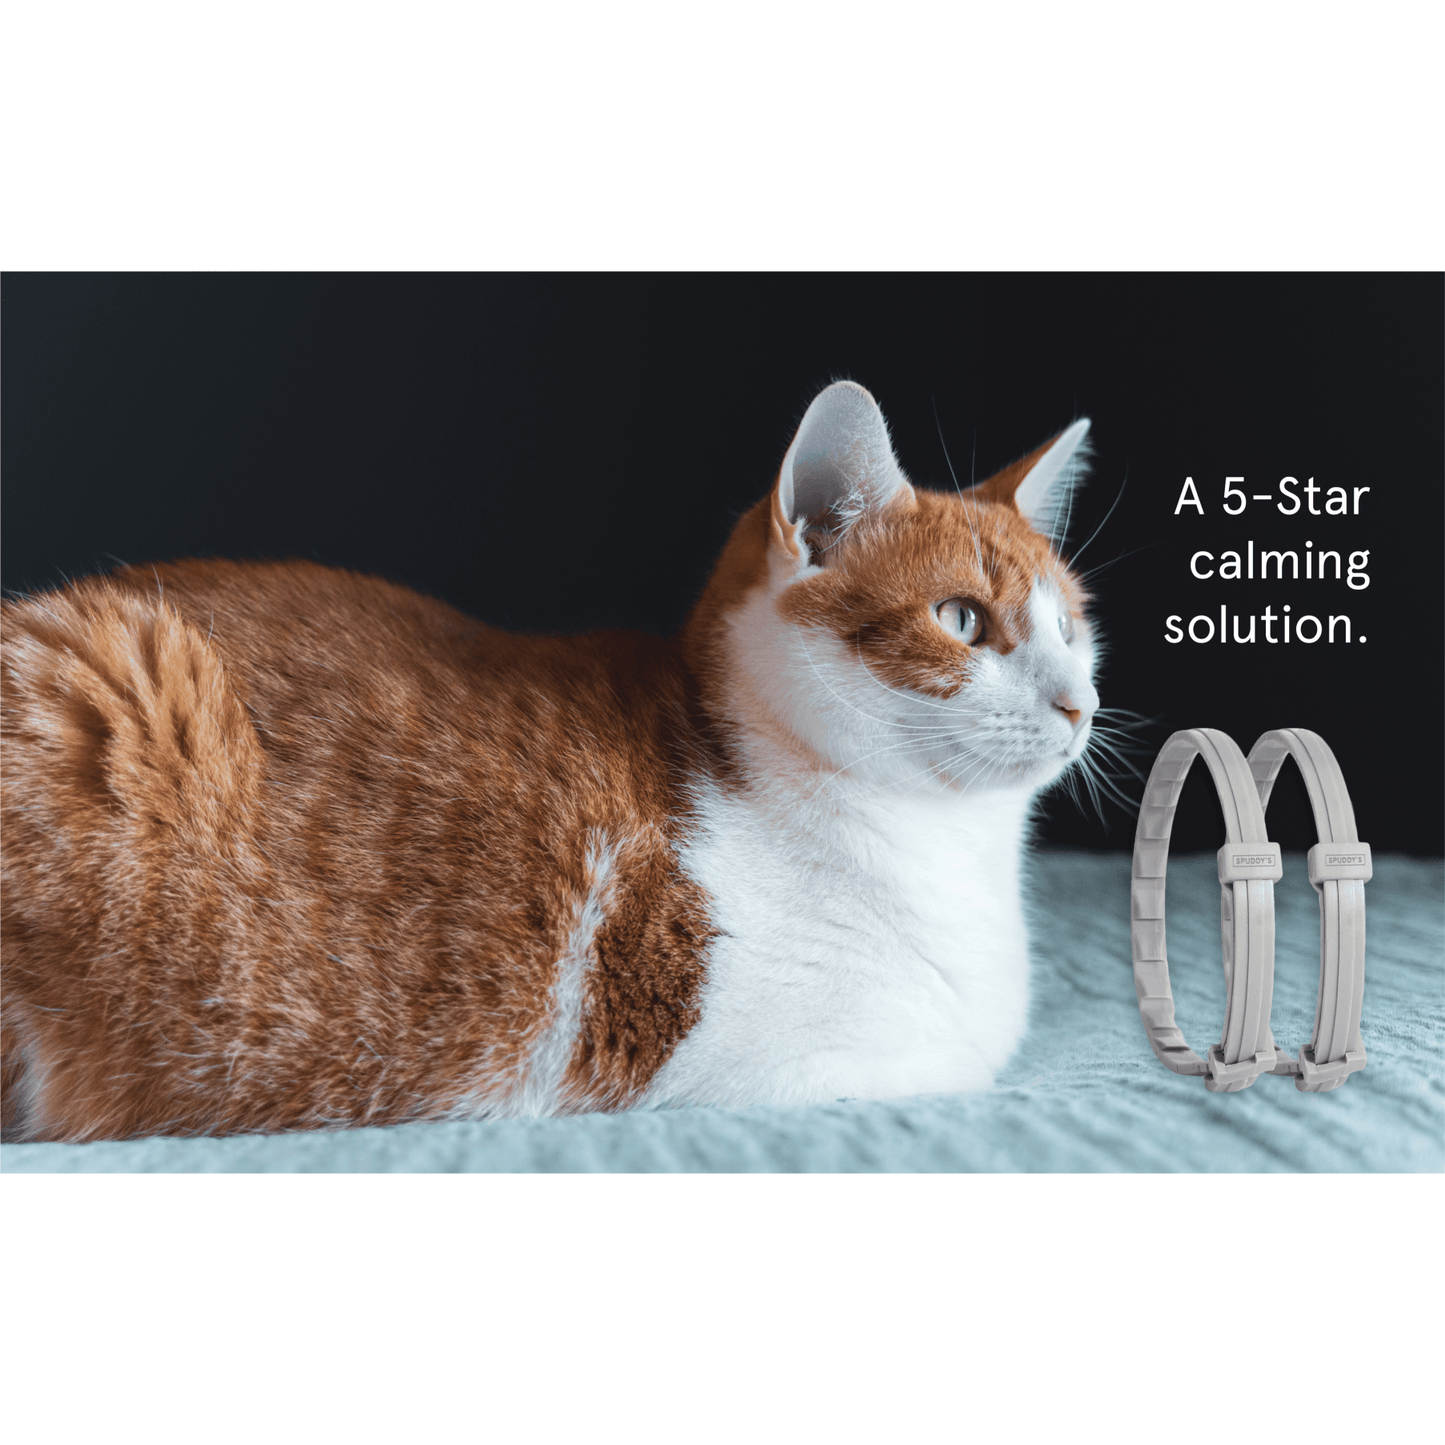 Pheromone Therapy Calming Collar for Cats - 2 Pack - Spuddy's & Friends